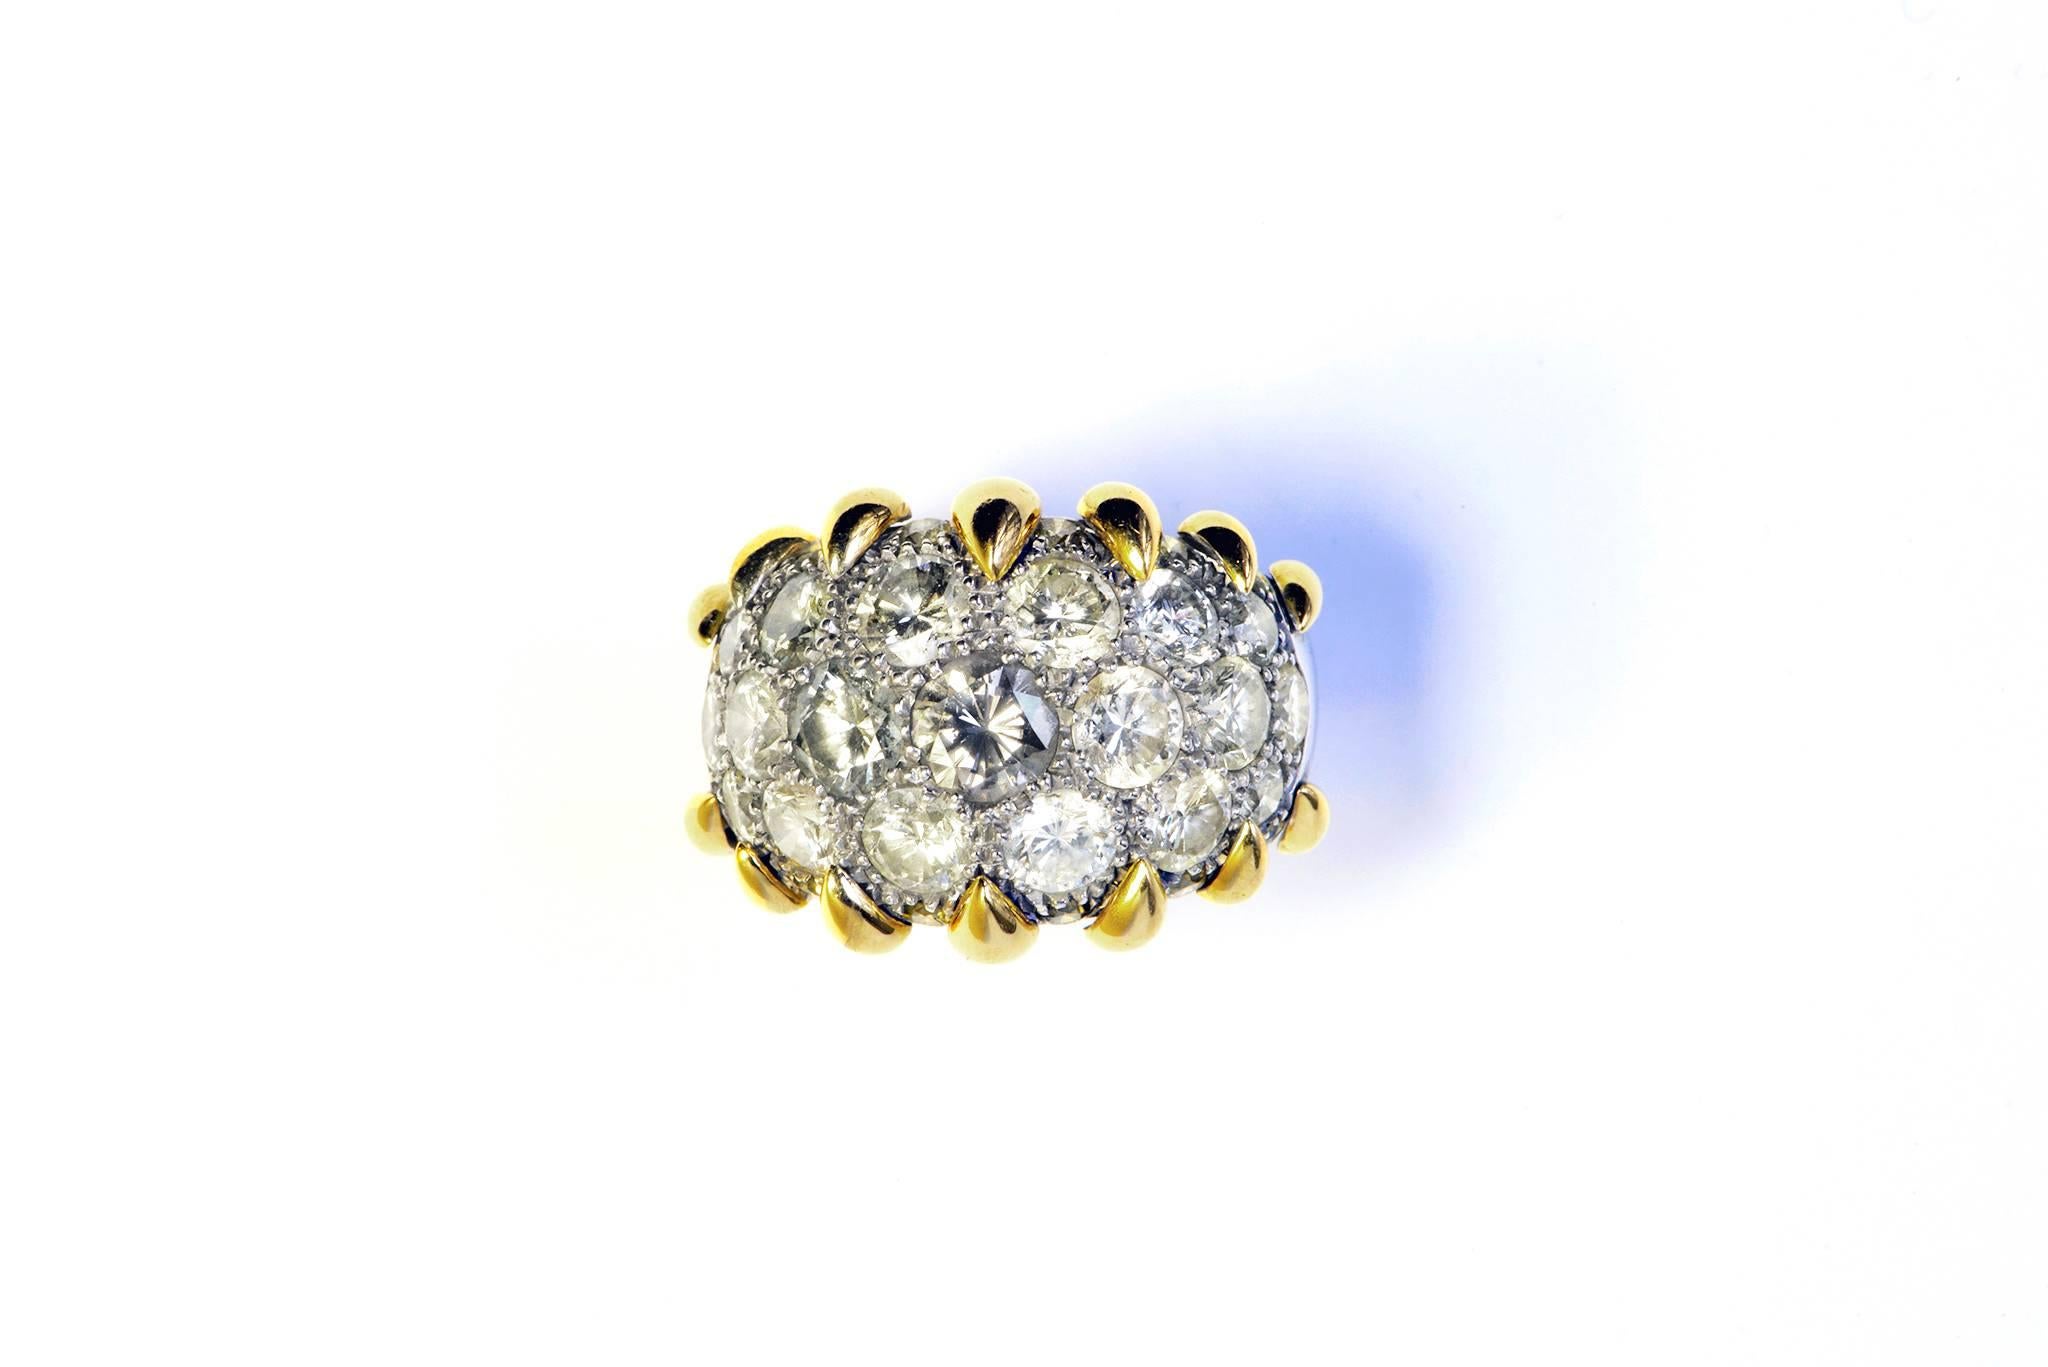 A white gold fancy diamonds ring enclosed and contrasted by yellow claws. This fancy diamonds pave-set has a subtle grey, beige and green graduation colour which makes this piece unique.
finger size: US size: 6.5  French size: 53
18k white and